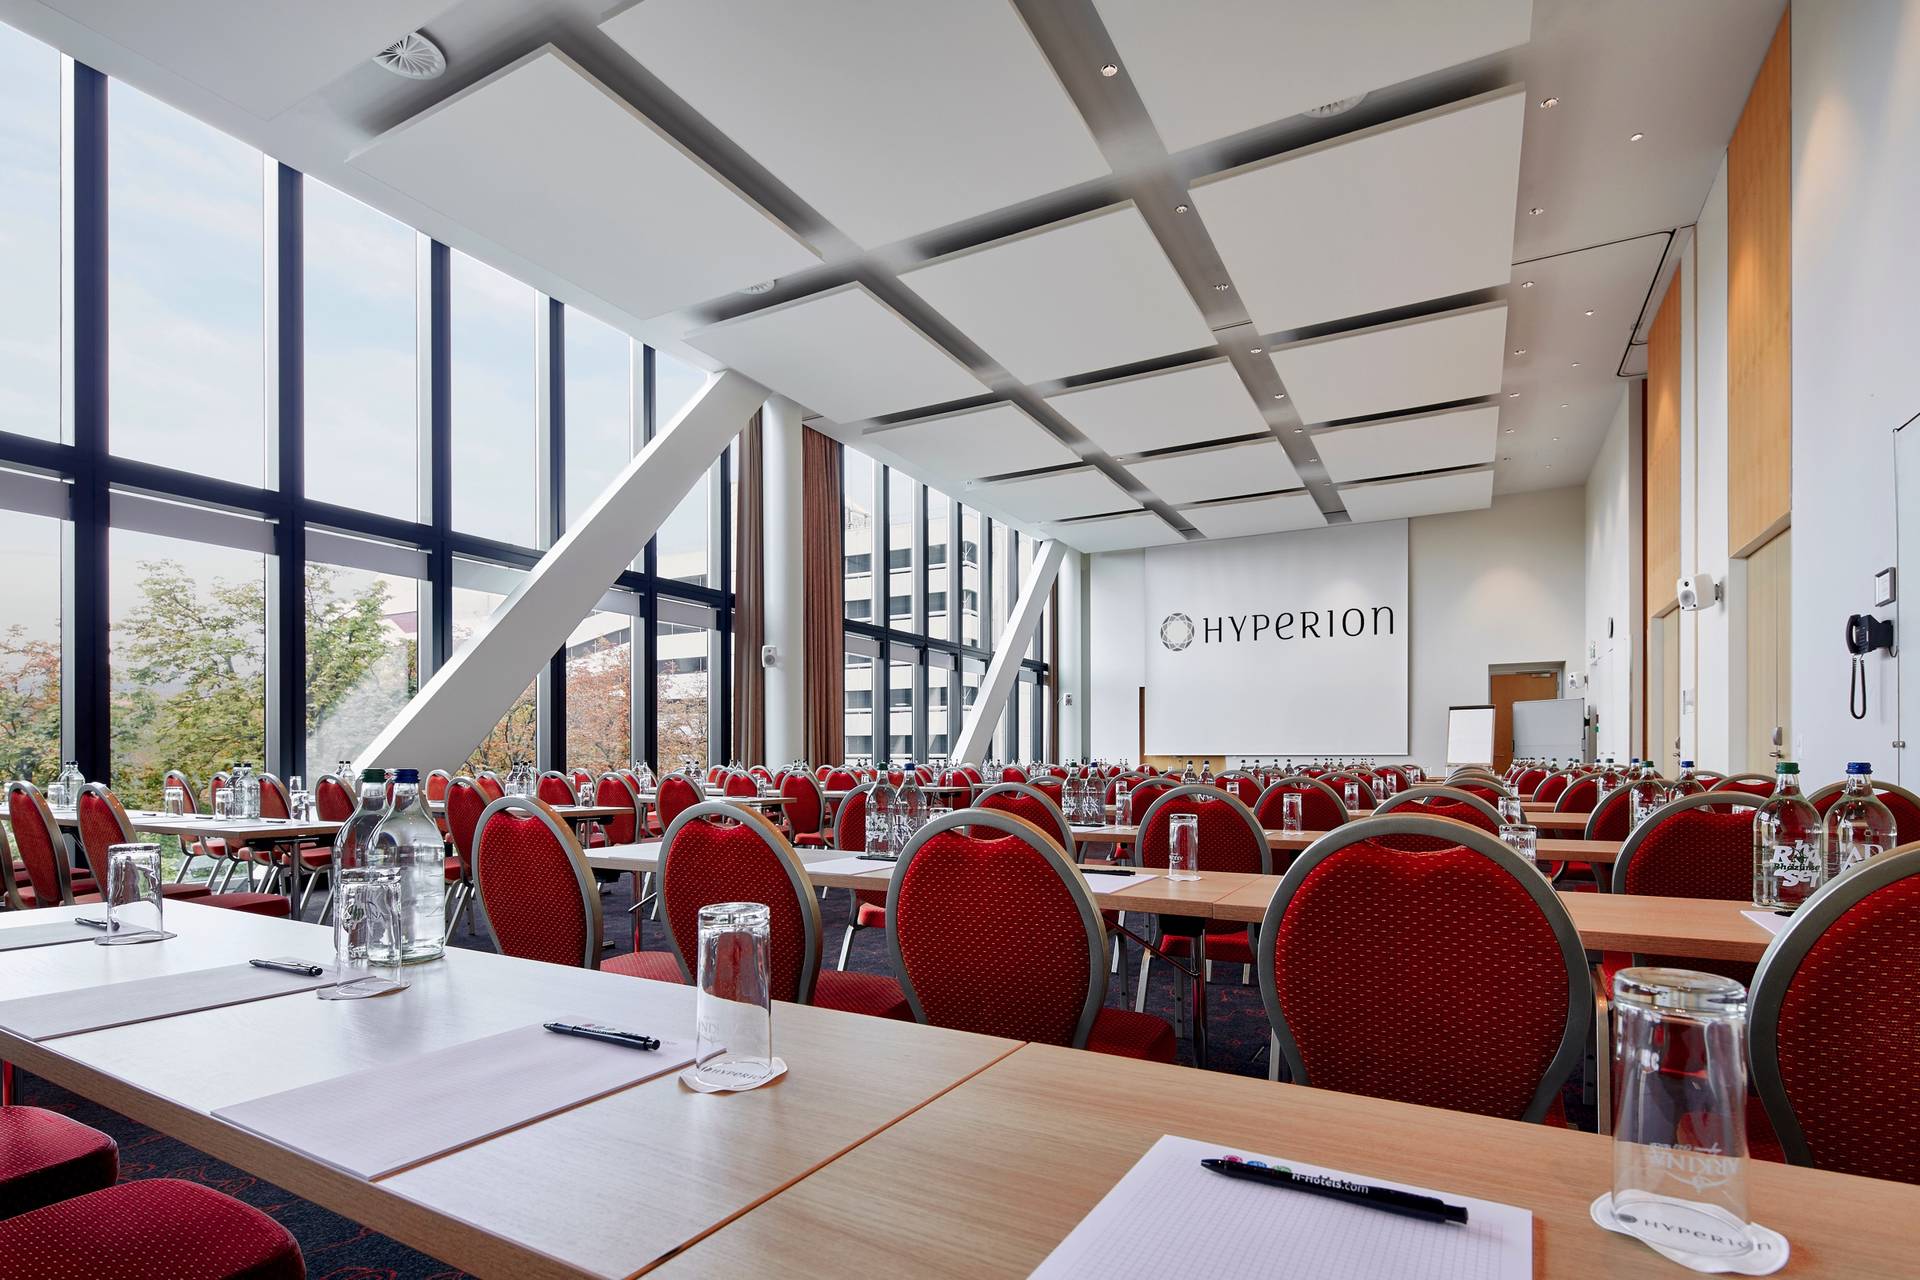 Spacious meeting rooms at the Hyperion Hotel Basel - Official website